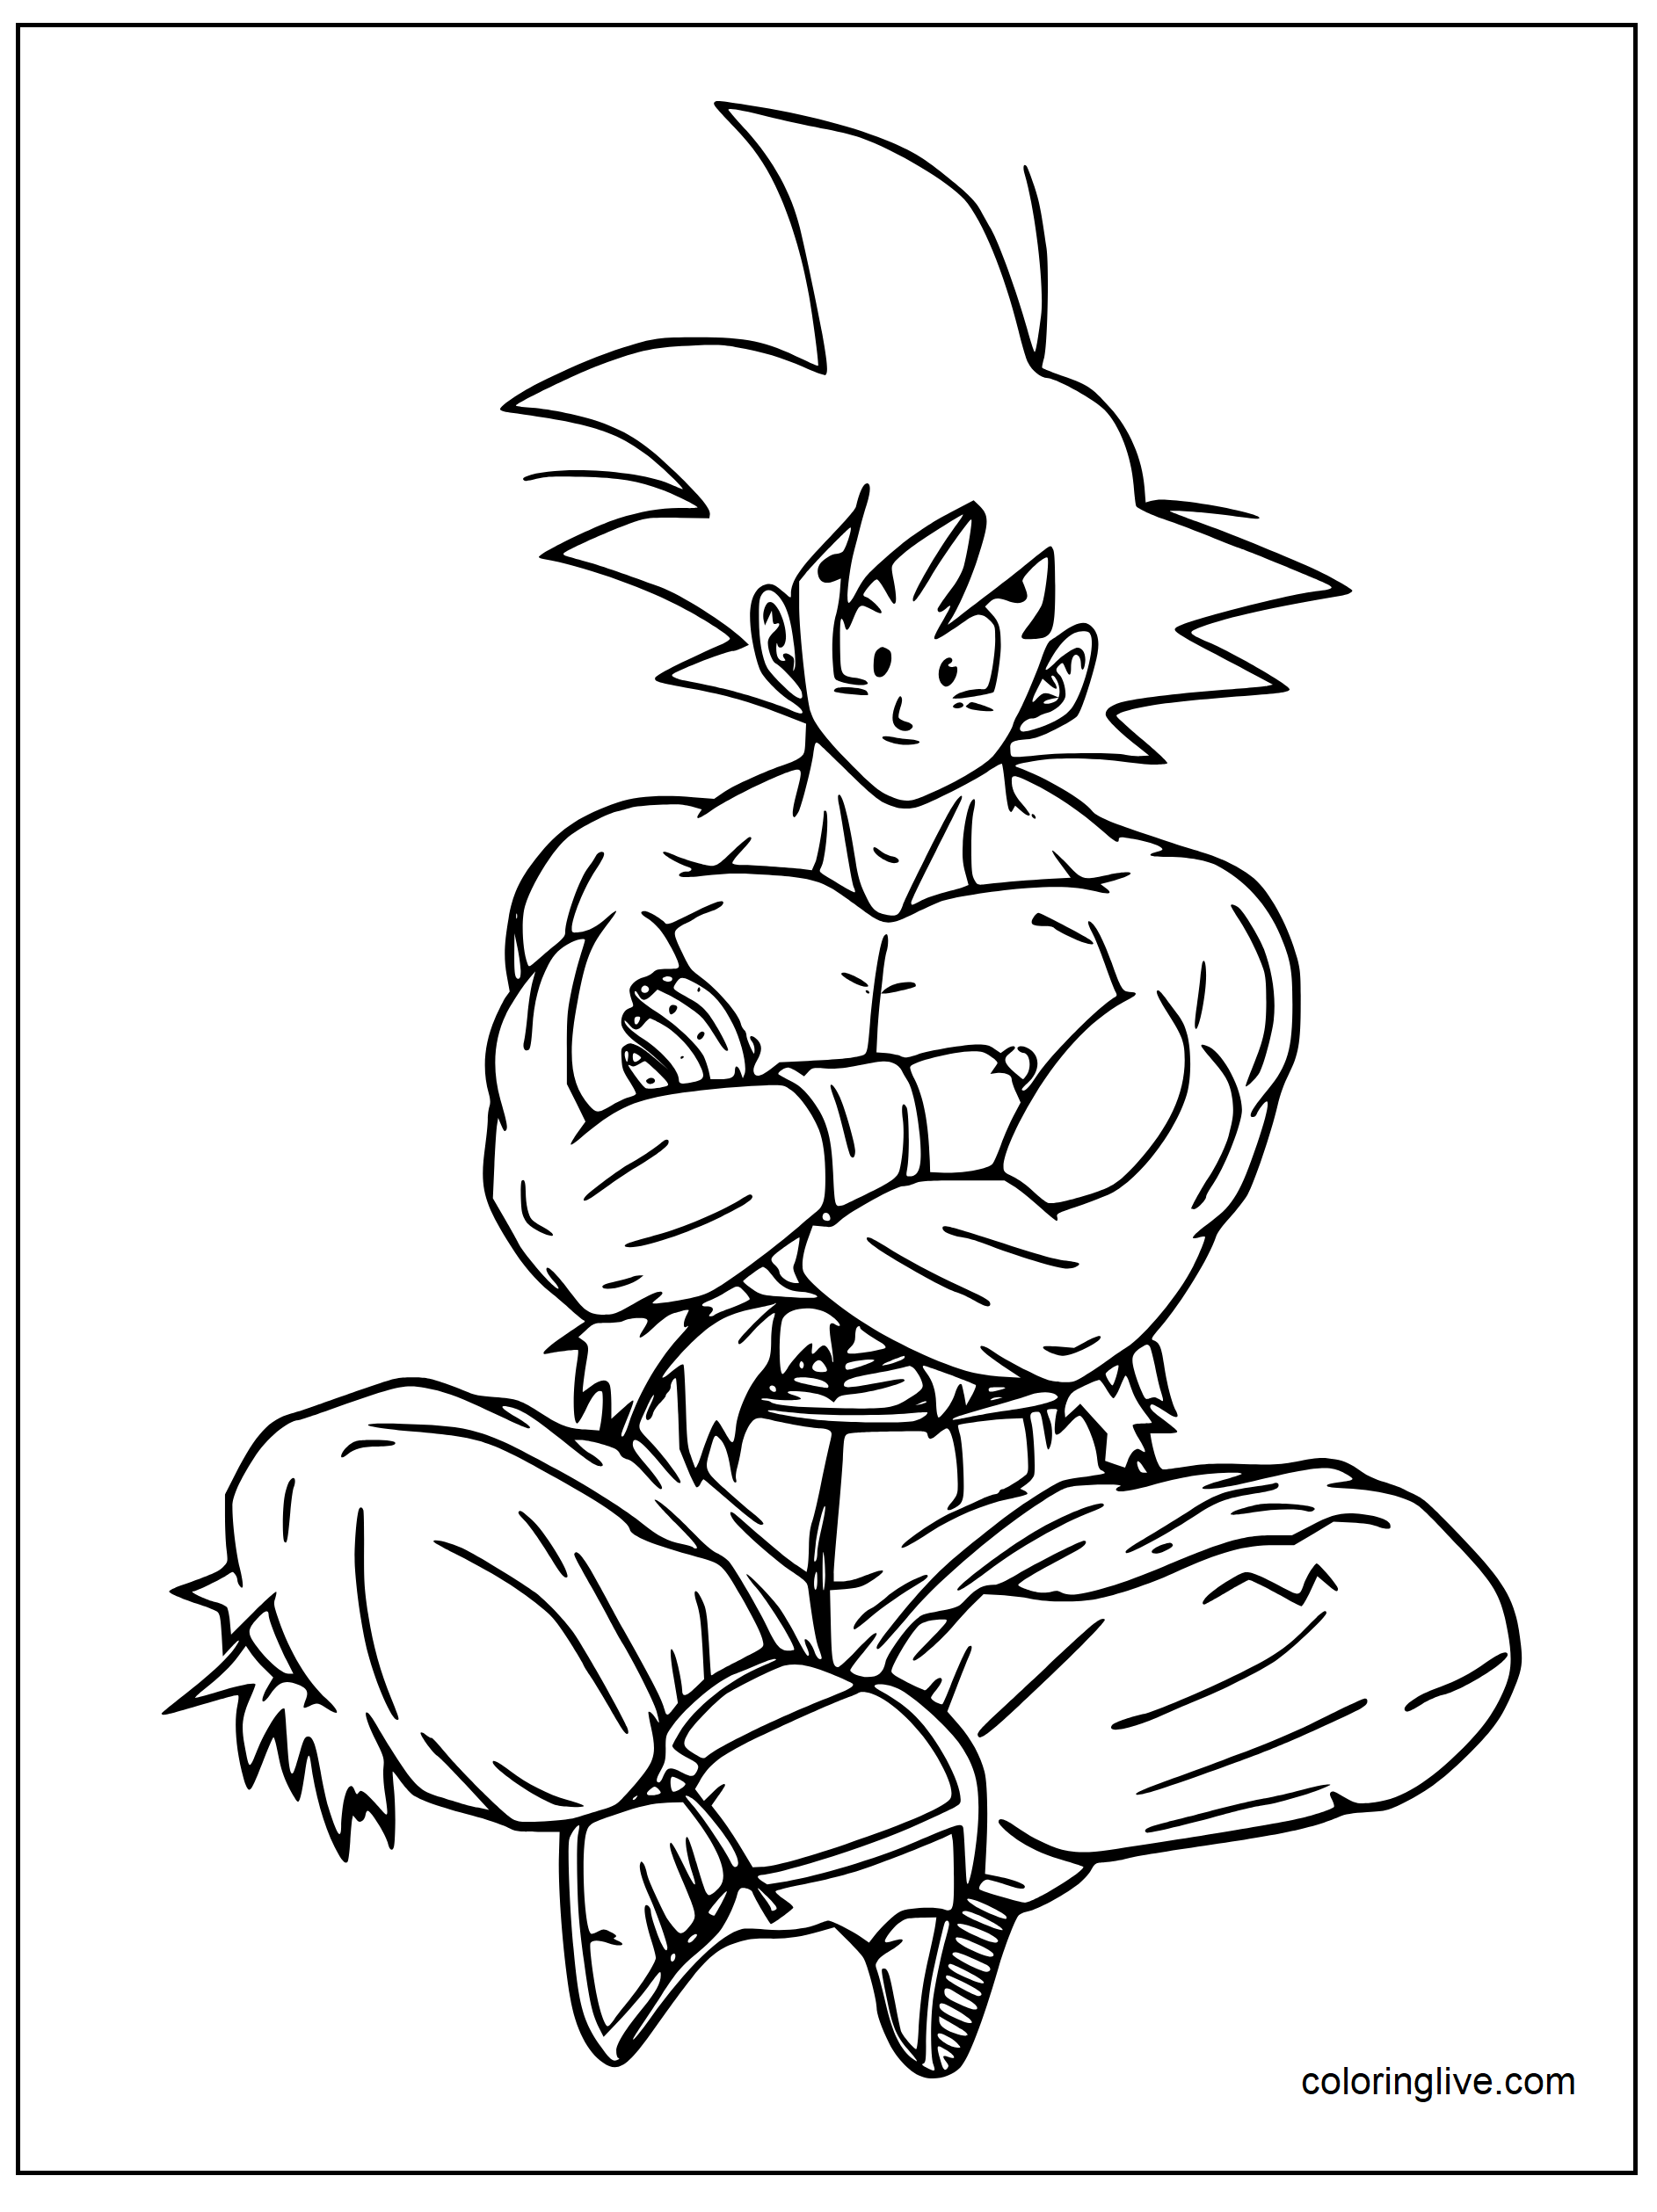 Printable Funny looking Goku Coloring Page for kids.